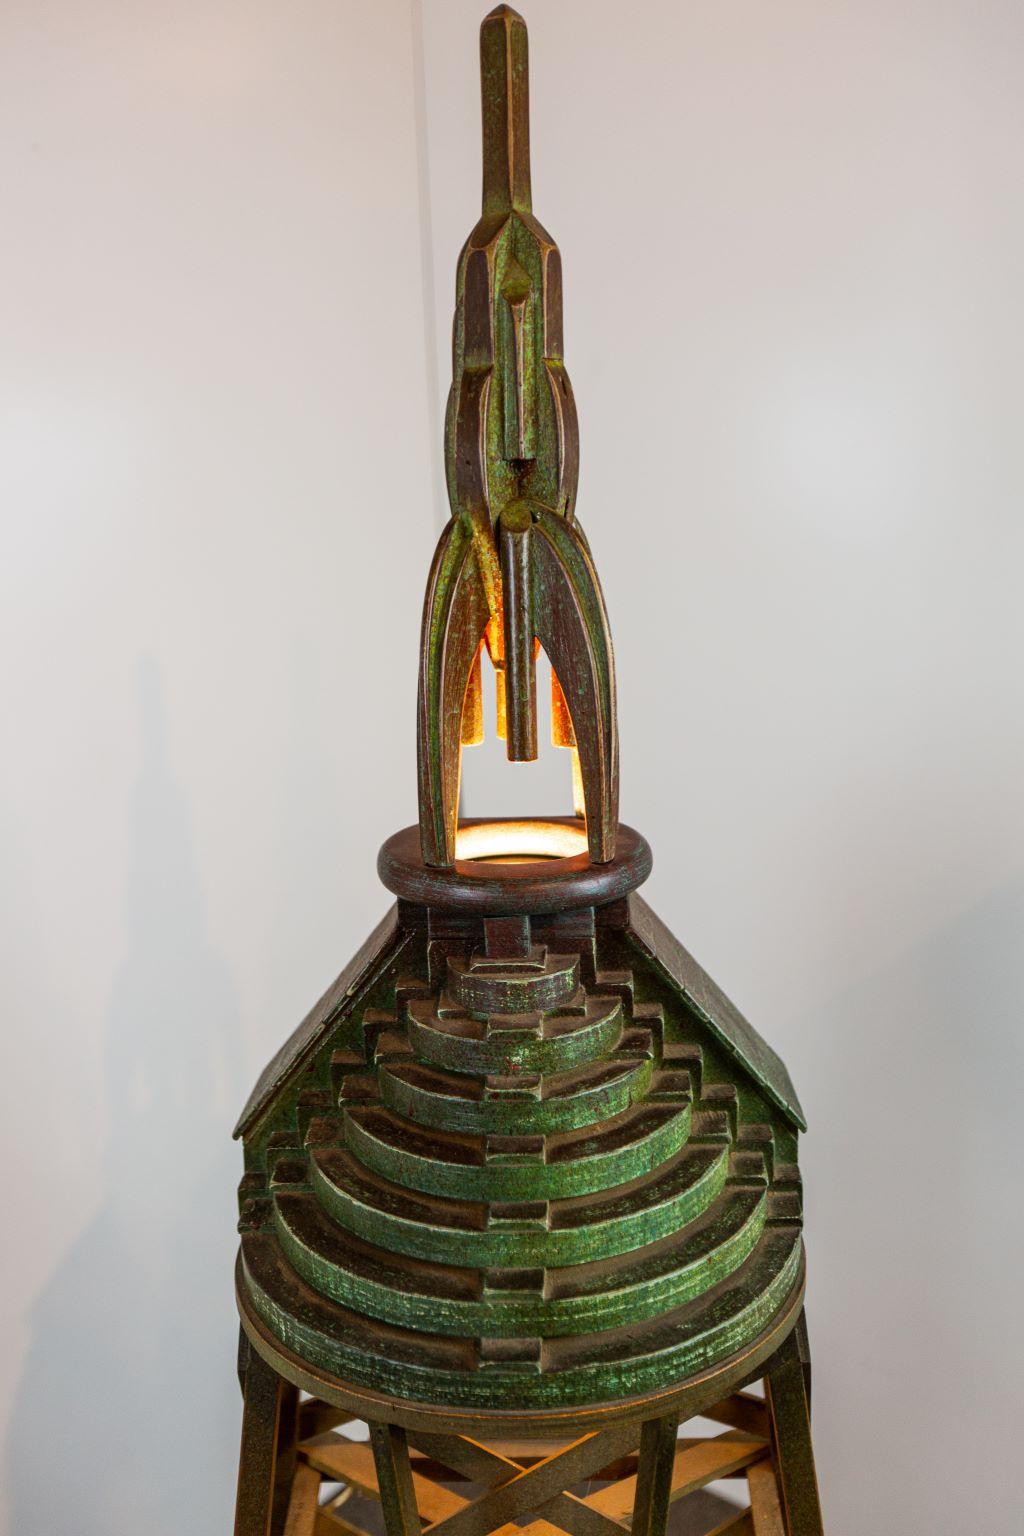 Magnificent mid century Art Deco skyscraper rocket Folk Art wooden floor lamp. Skyscraper light fixture and rocket sit atop of an incredibly detailed crisscross framework. (Lamp contains original and working hardware). Dimensions: 64 inches high, 20